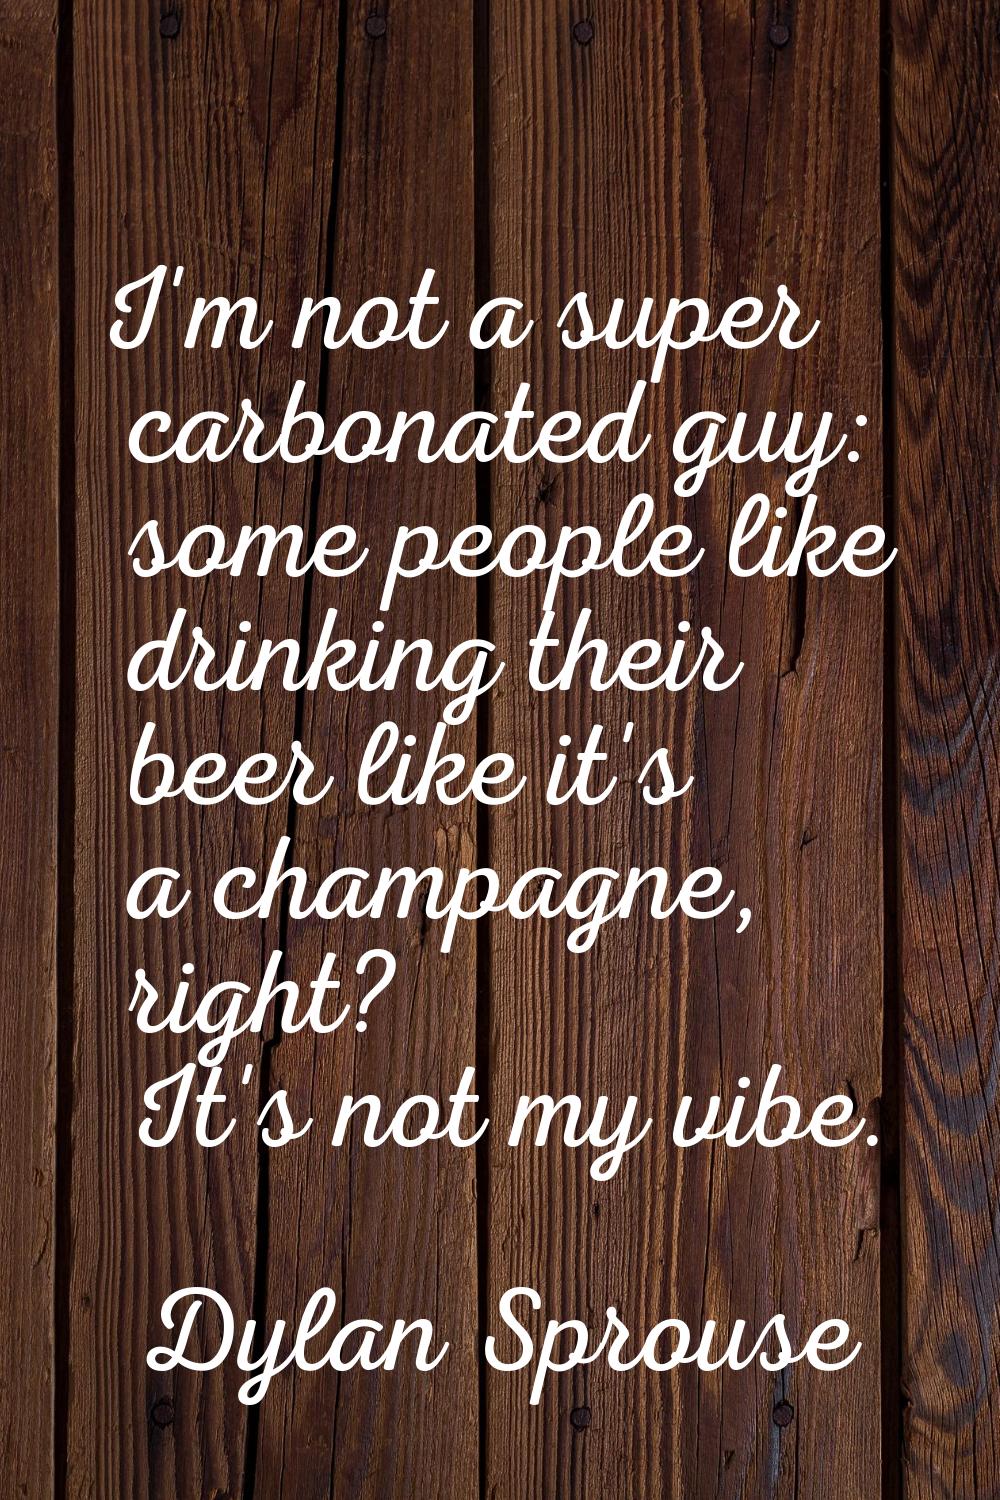 I'm not a super carbonated guy: some people like drinking their beer like it's a champagne, right? 